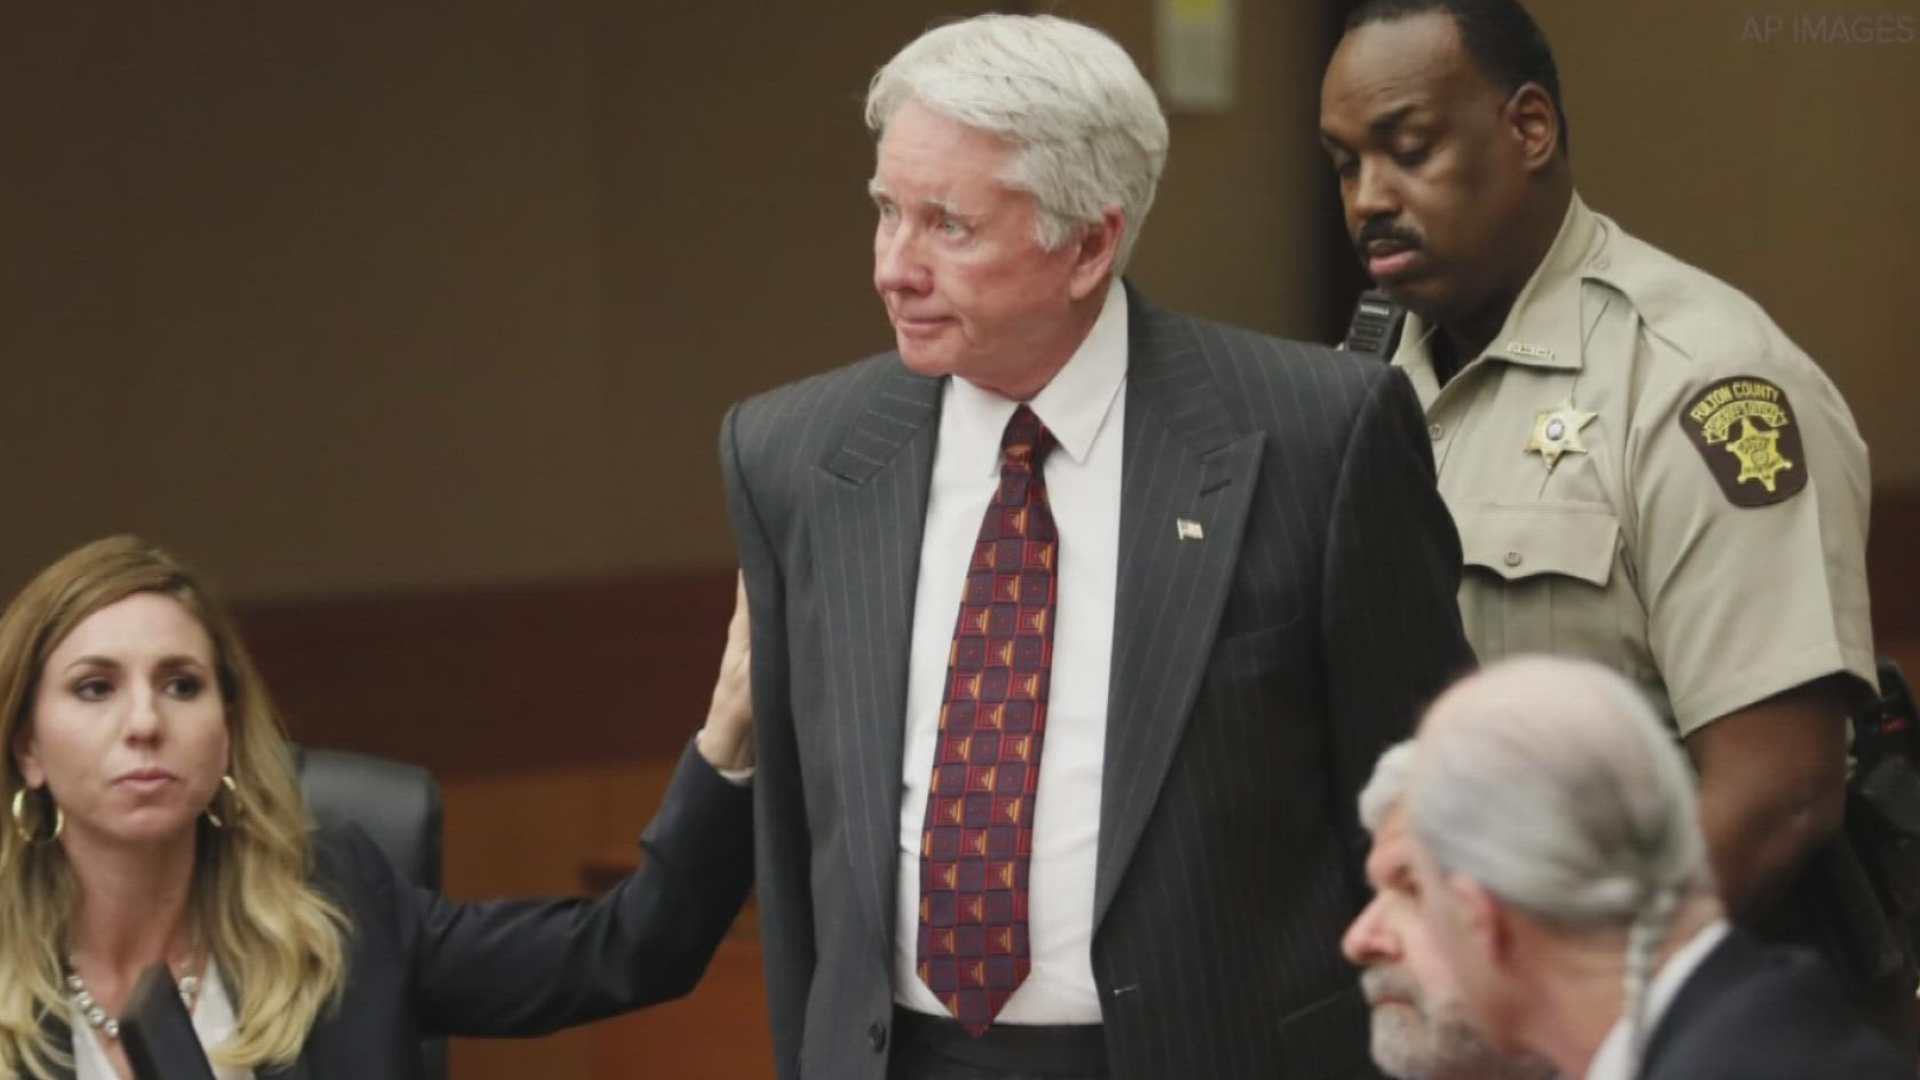 The Georgia Supreme Court on Thursday announced it was overturning the felony murder conviction against Tex McIver.